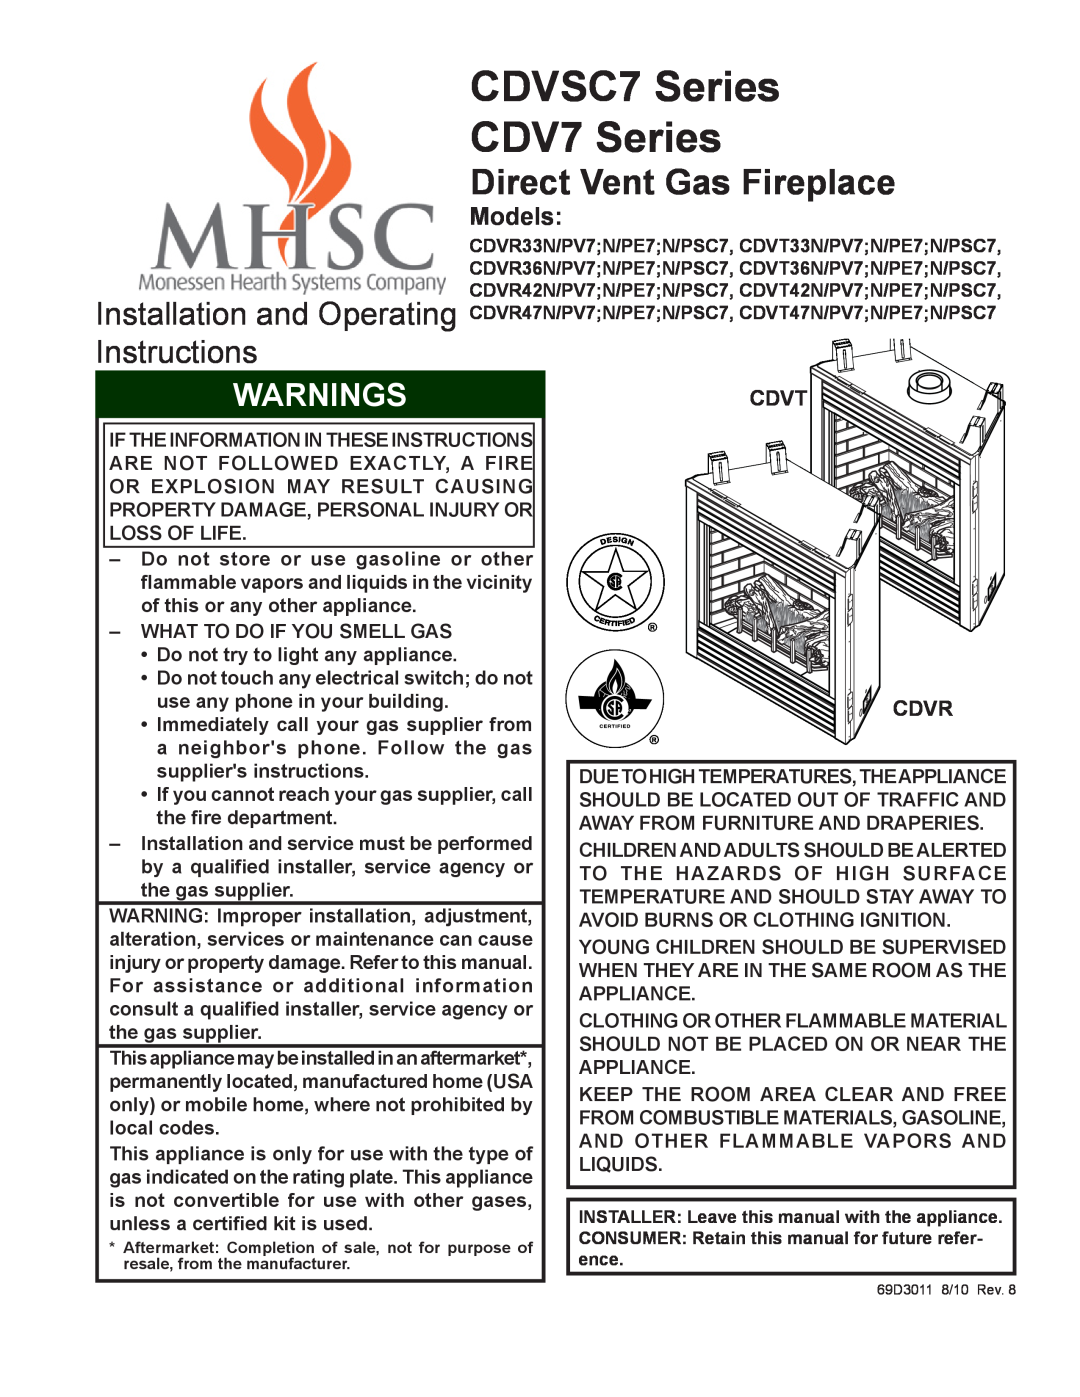 Monessen Hearth CDV7 manual Cdvt, Cdvr, What To Do If You Smell Gas, Do not try to light any appliance, Warnings, Models 